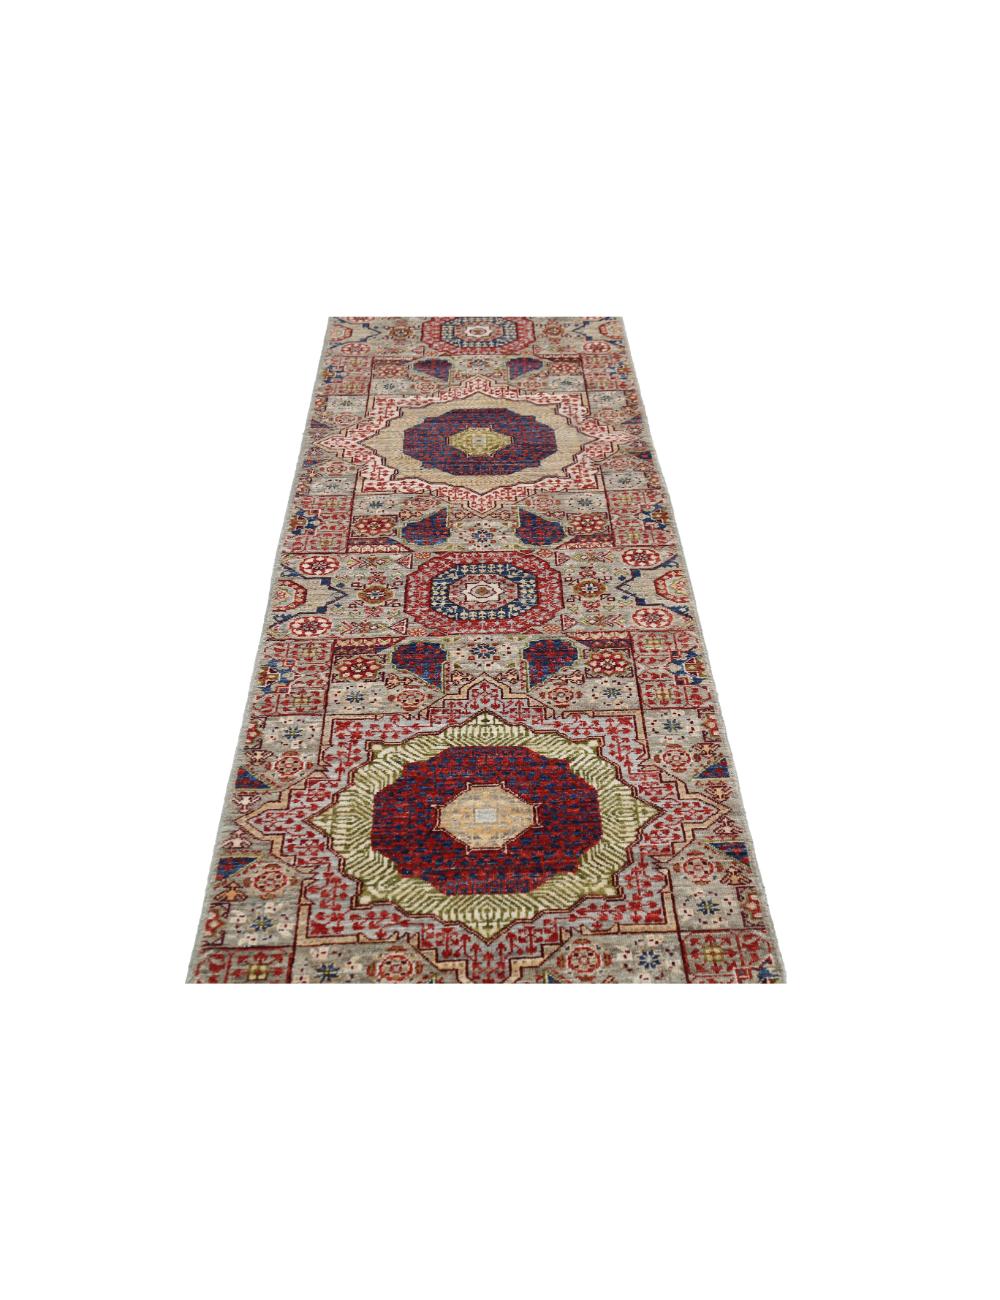 Mamluk 2' 6" X 19' 6" Hand-Knotted Wool Rug 2' 6" X 19' 6" (76 X 594) / Green / Red